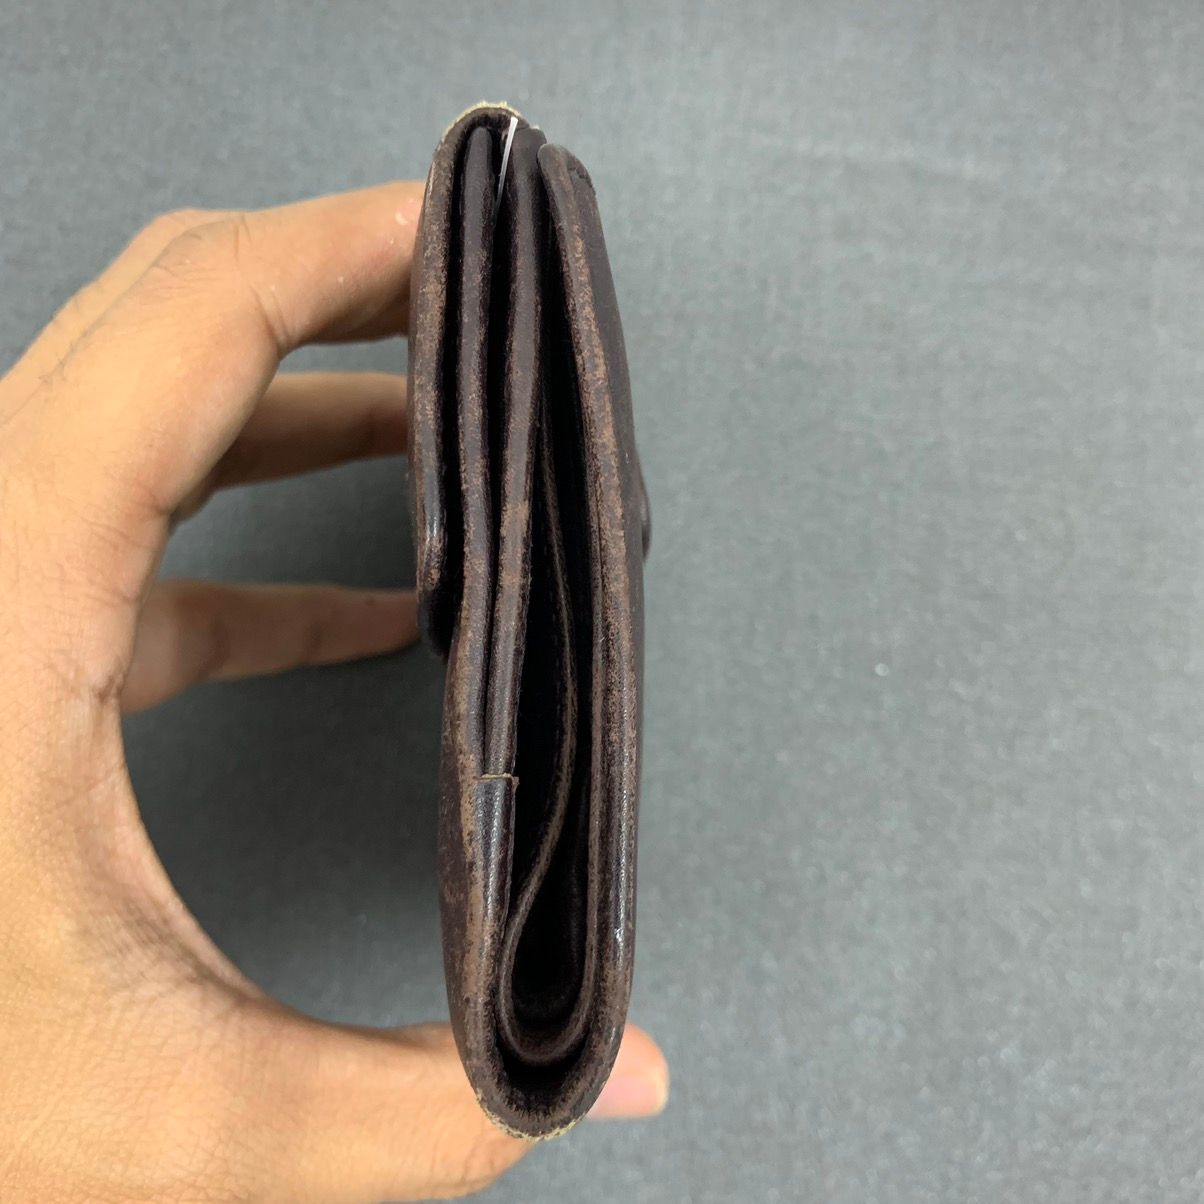 Thrashed Gucci Leather Wallet - 3